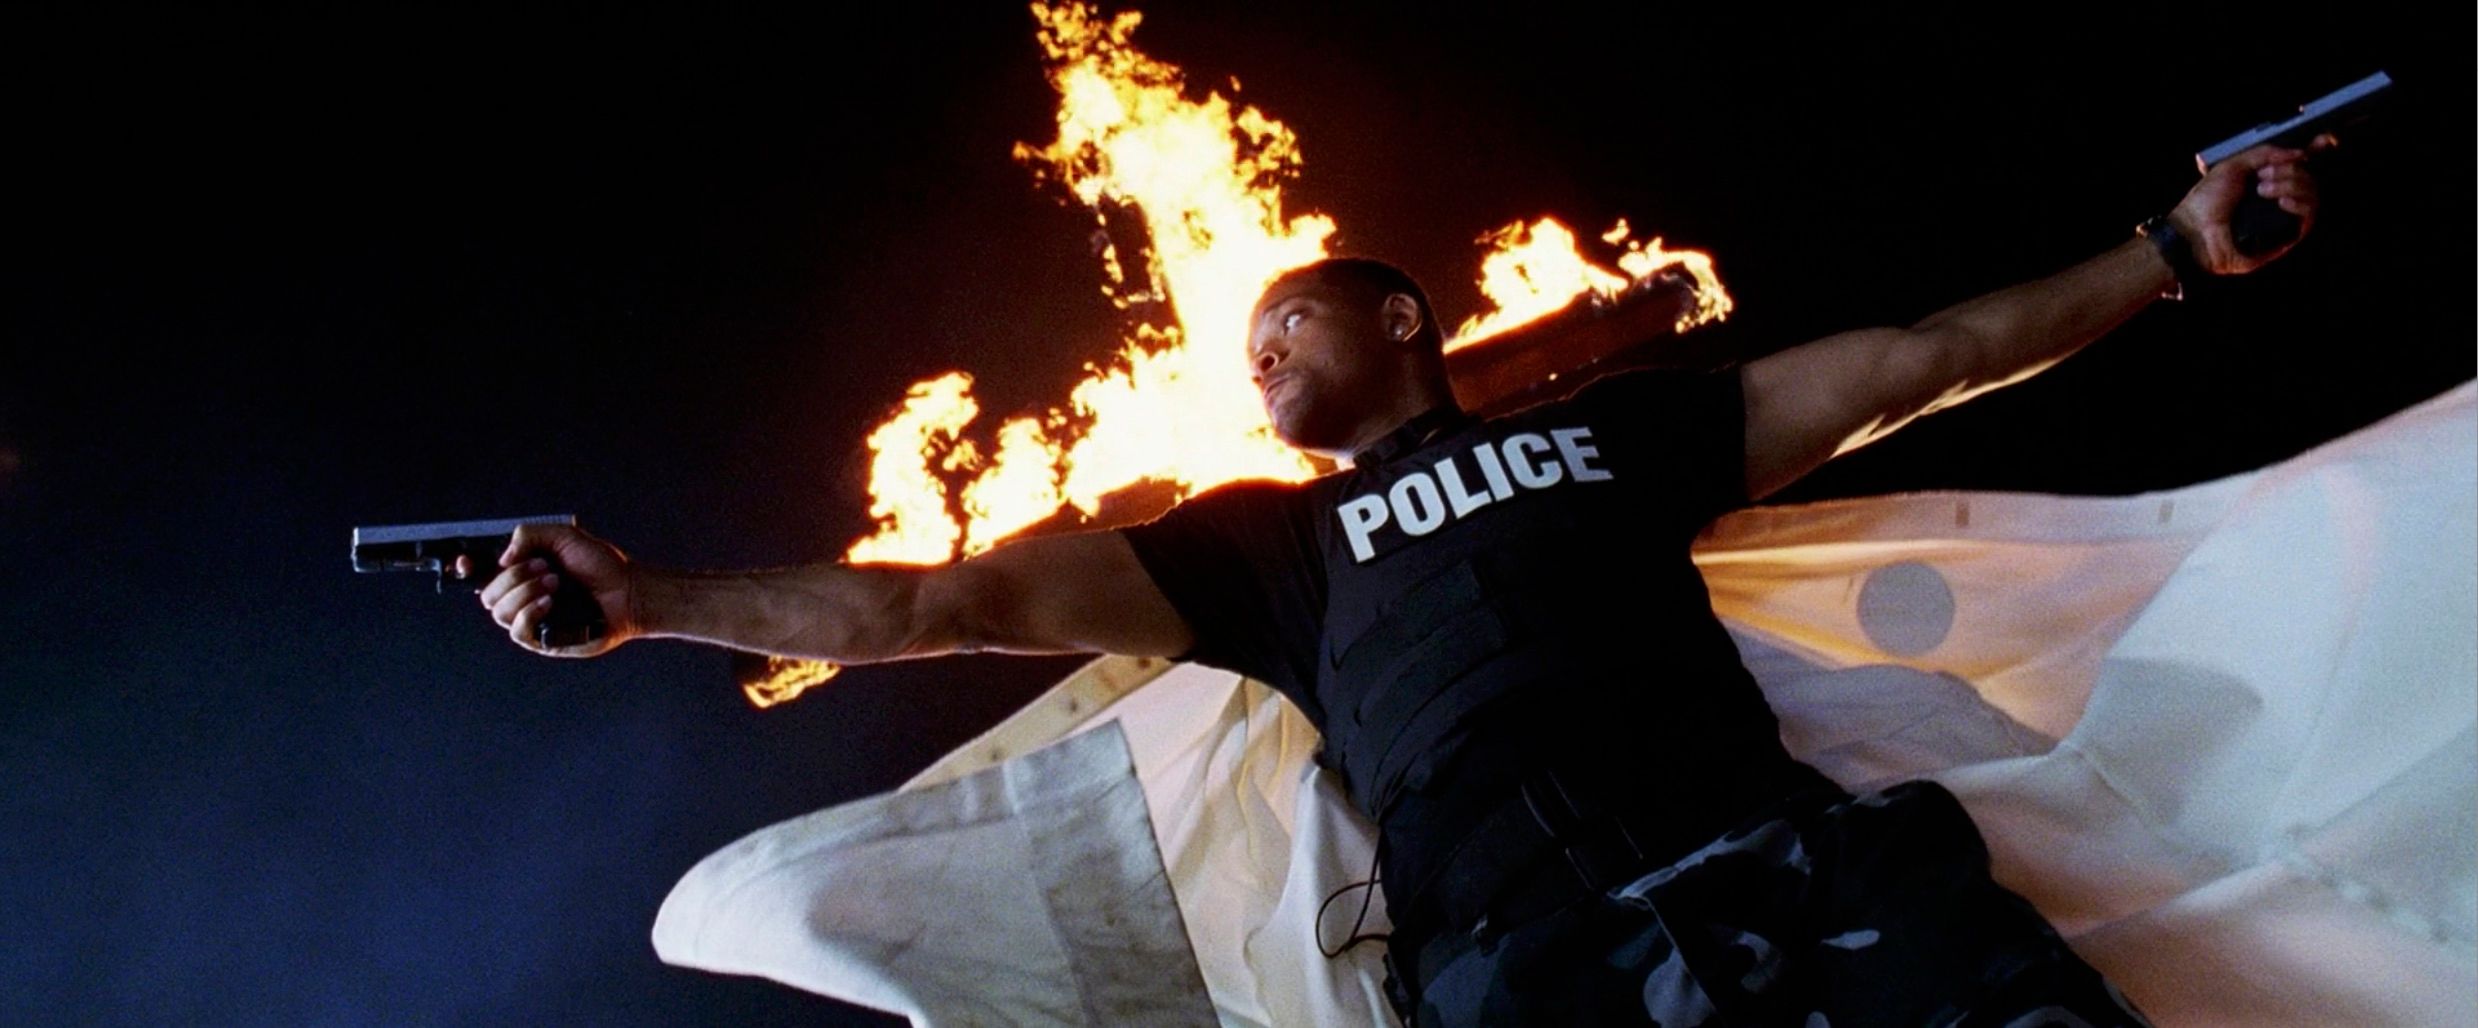 Will Smith in Bad Boys II